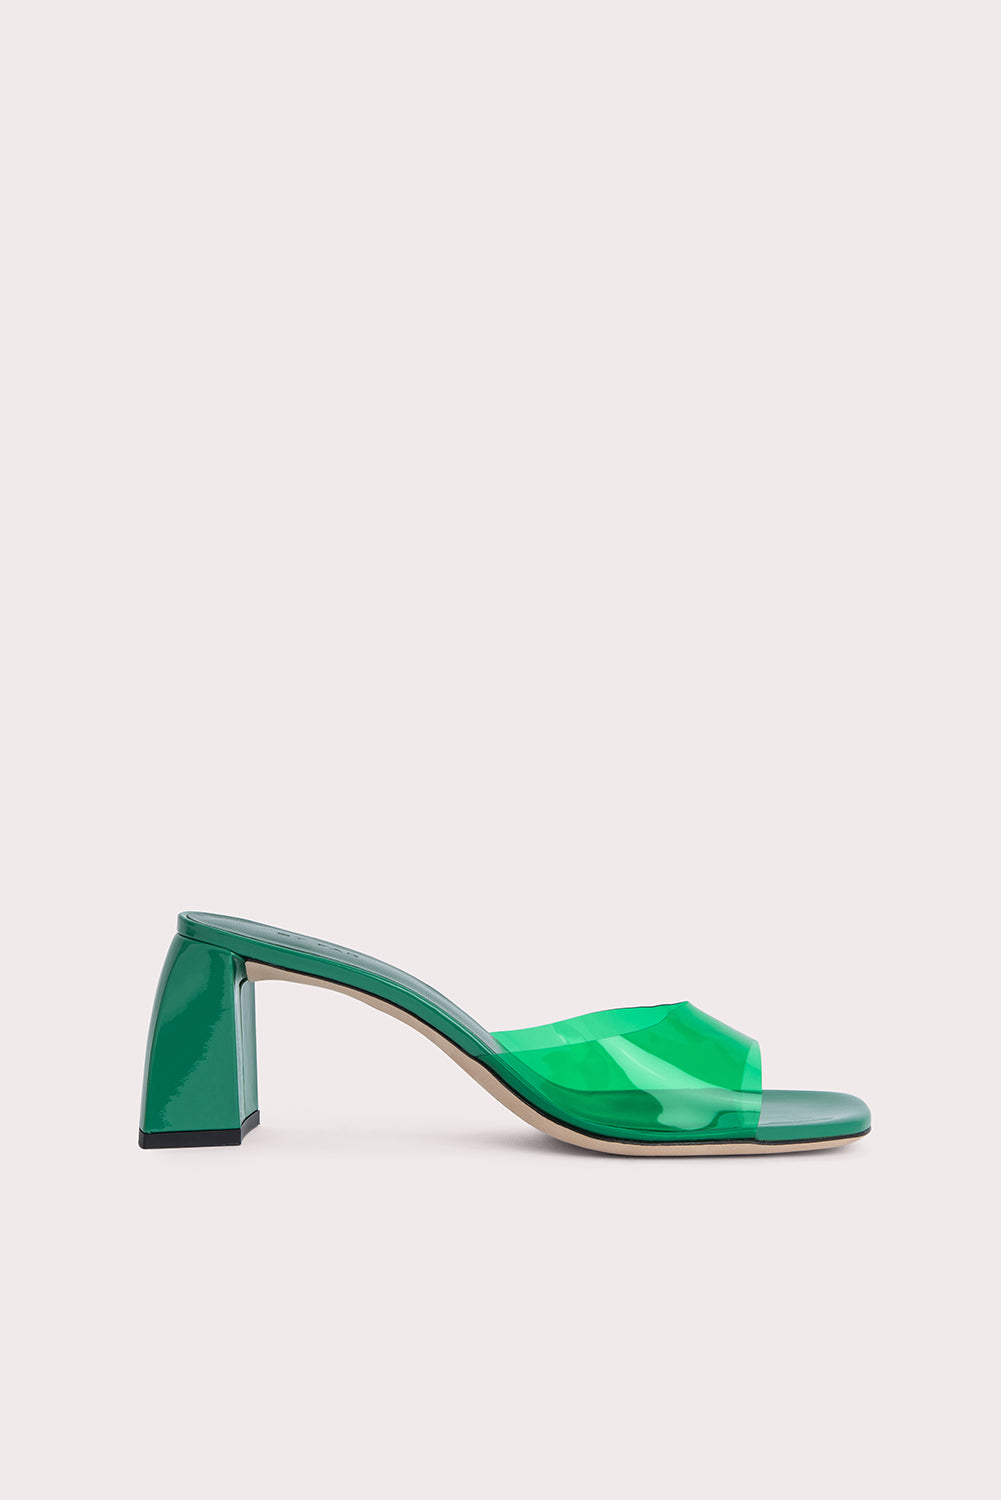 Romy Clover Green PVC and Patent Leather - BY FAR